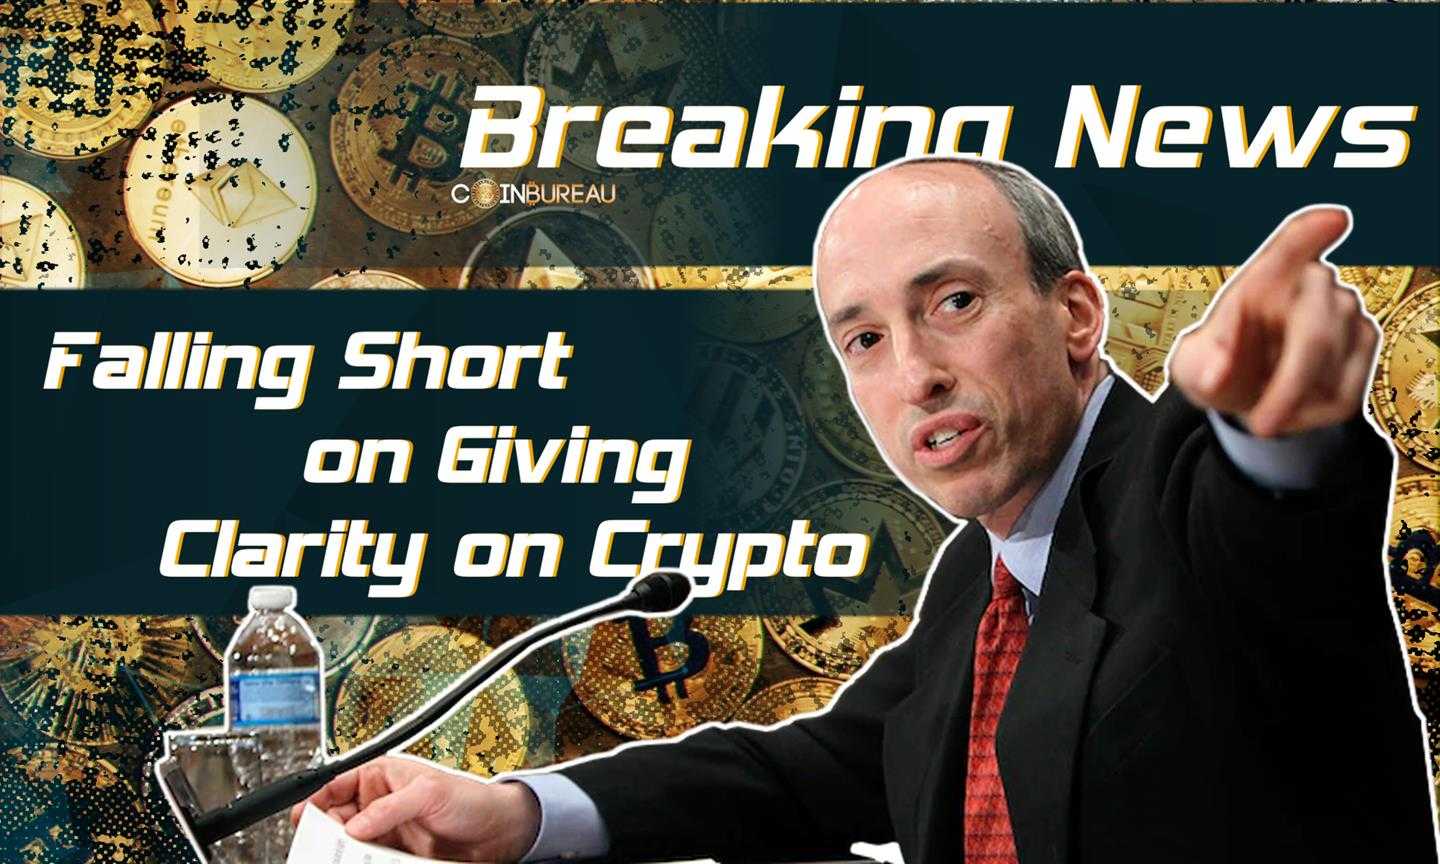 SEC Commissioners Say Chairman Gensler Falling Short on Crypto Clarity